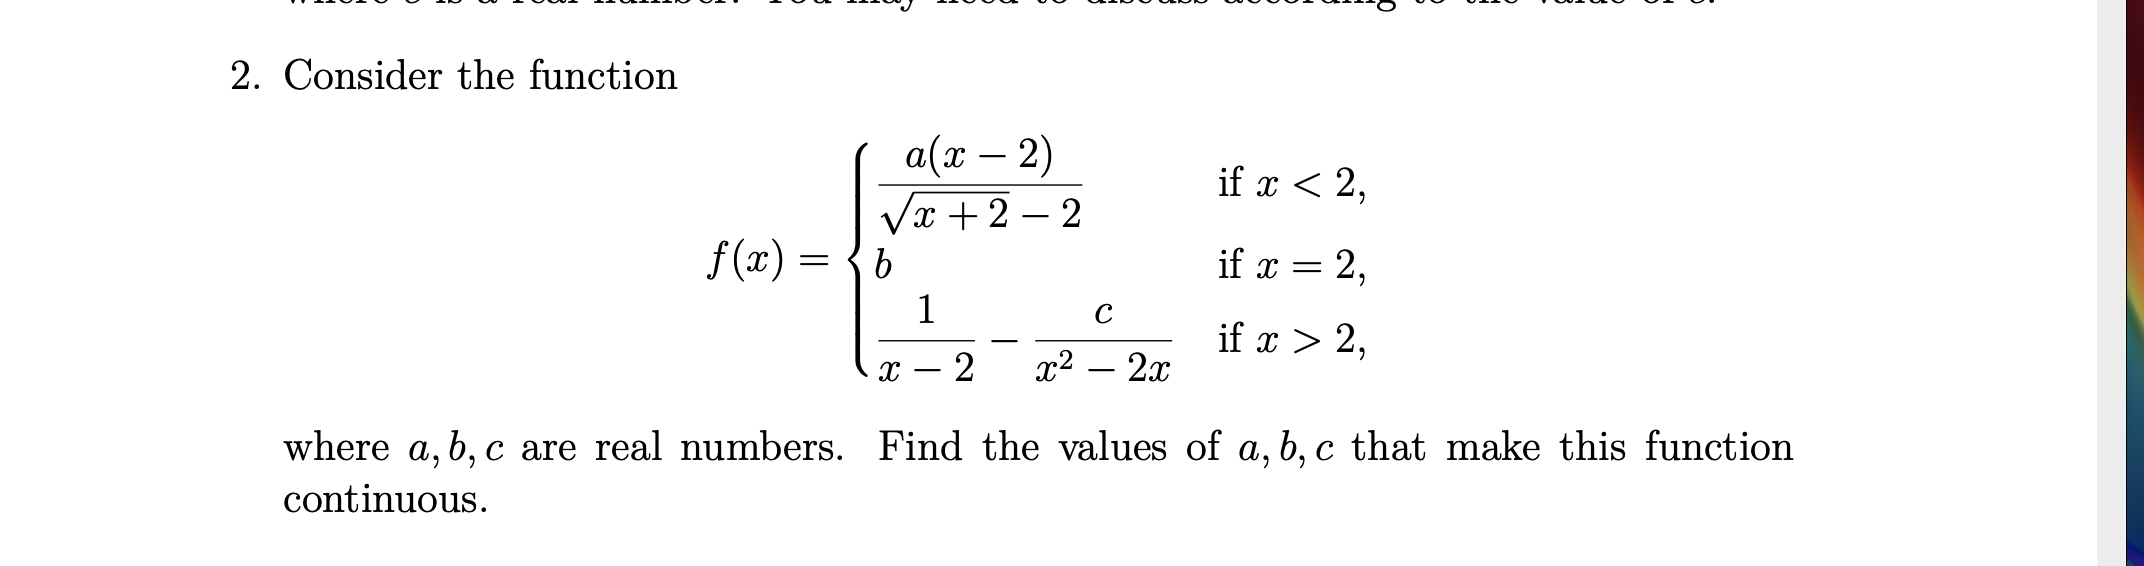 2. Consider the function
а(т — 2)
Vx +2 – 2
-
if x < 2,
-
f(x) = {b
if x = 2,
1
C
if x > 2,
2x
2
x²
-
where a, b, c are real numbers. Find the values of a, b, c that make this function
continuous.
